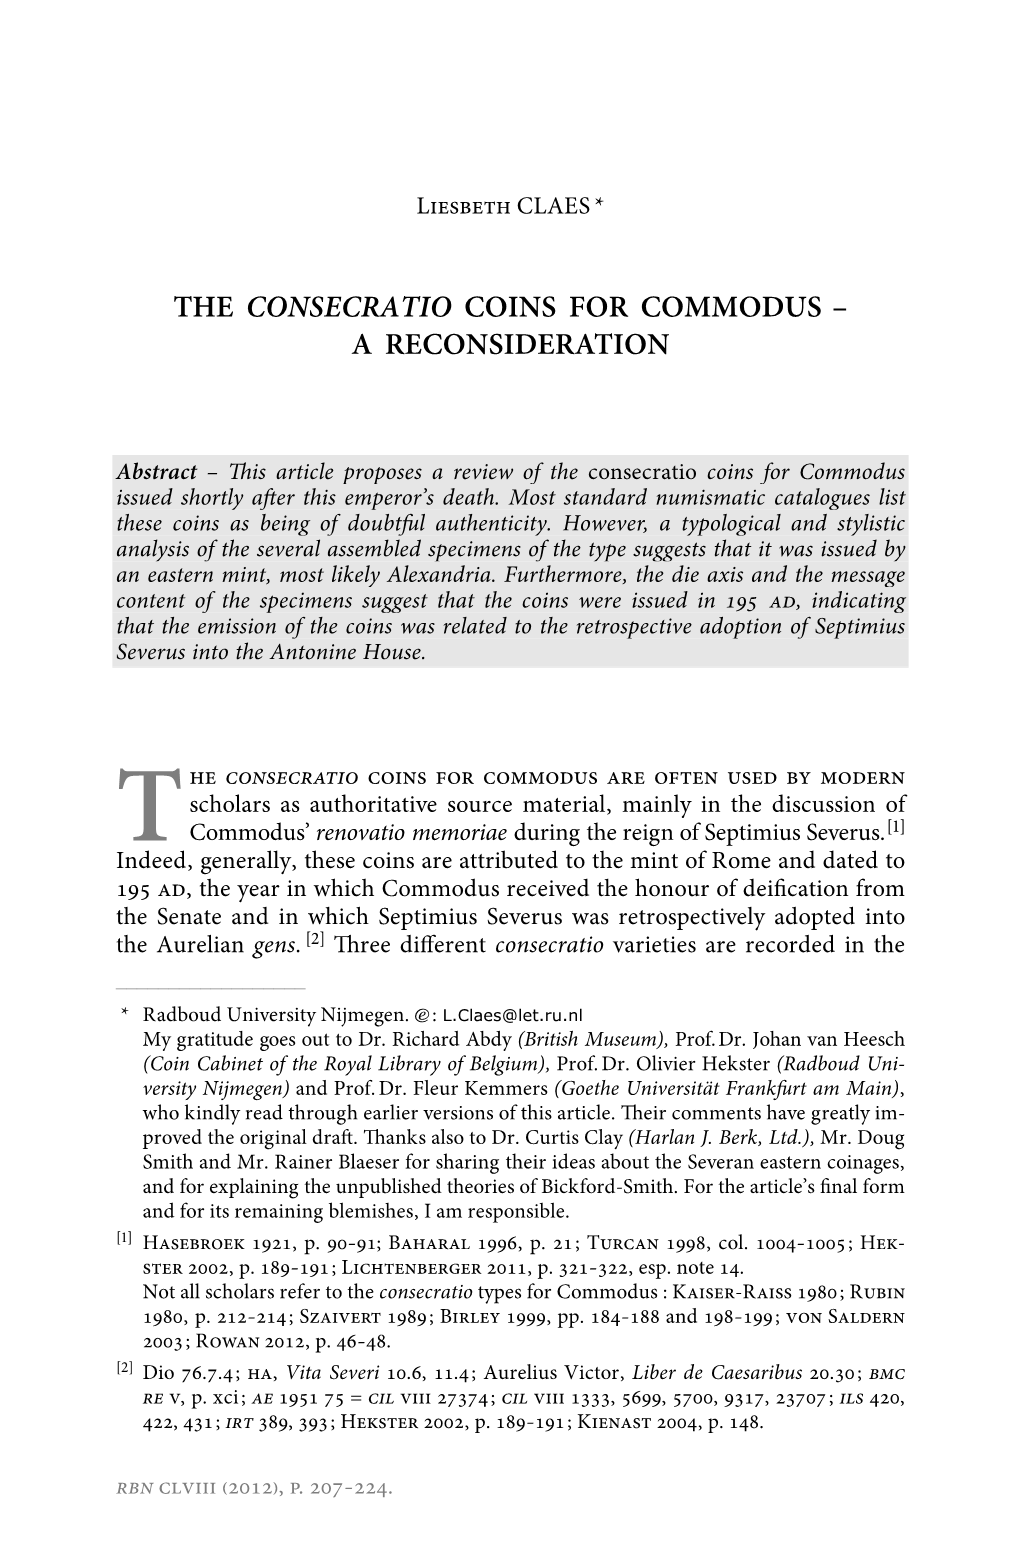 The Consecratio Coins for Commodus – a Reconsideration